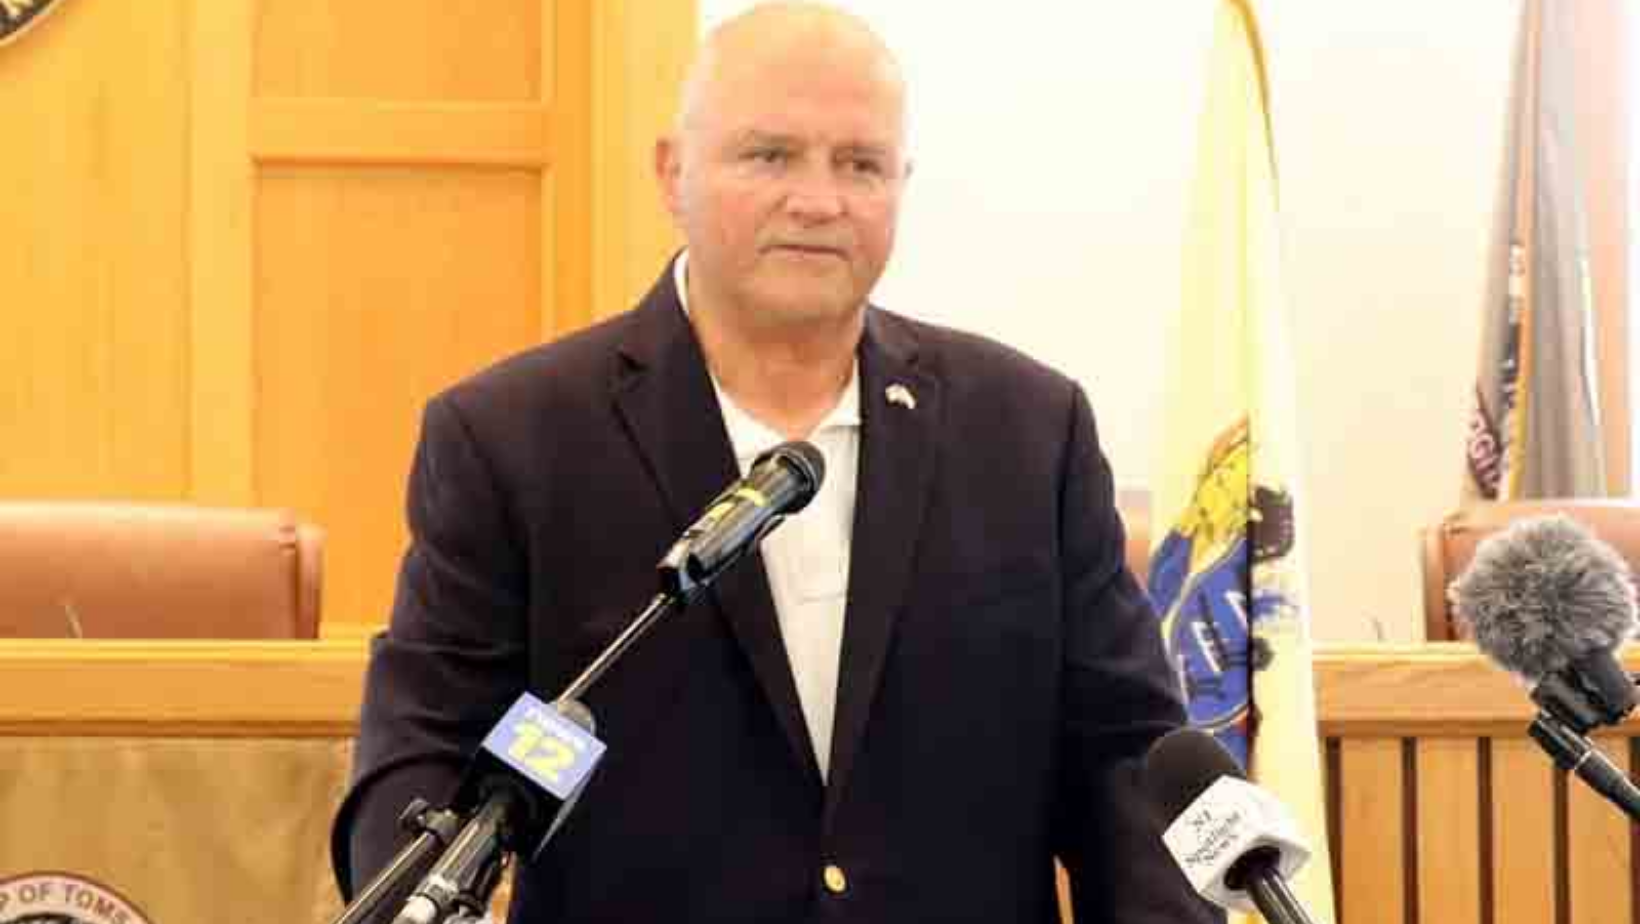 “I’m Not Concerned With The FBI”, Toms River Councilman Says After ...